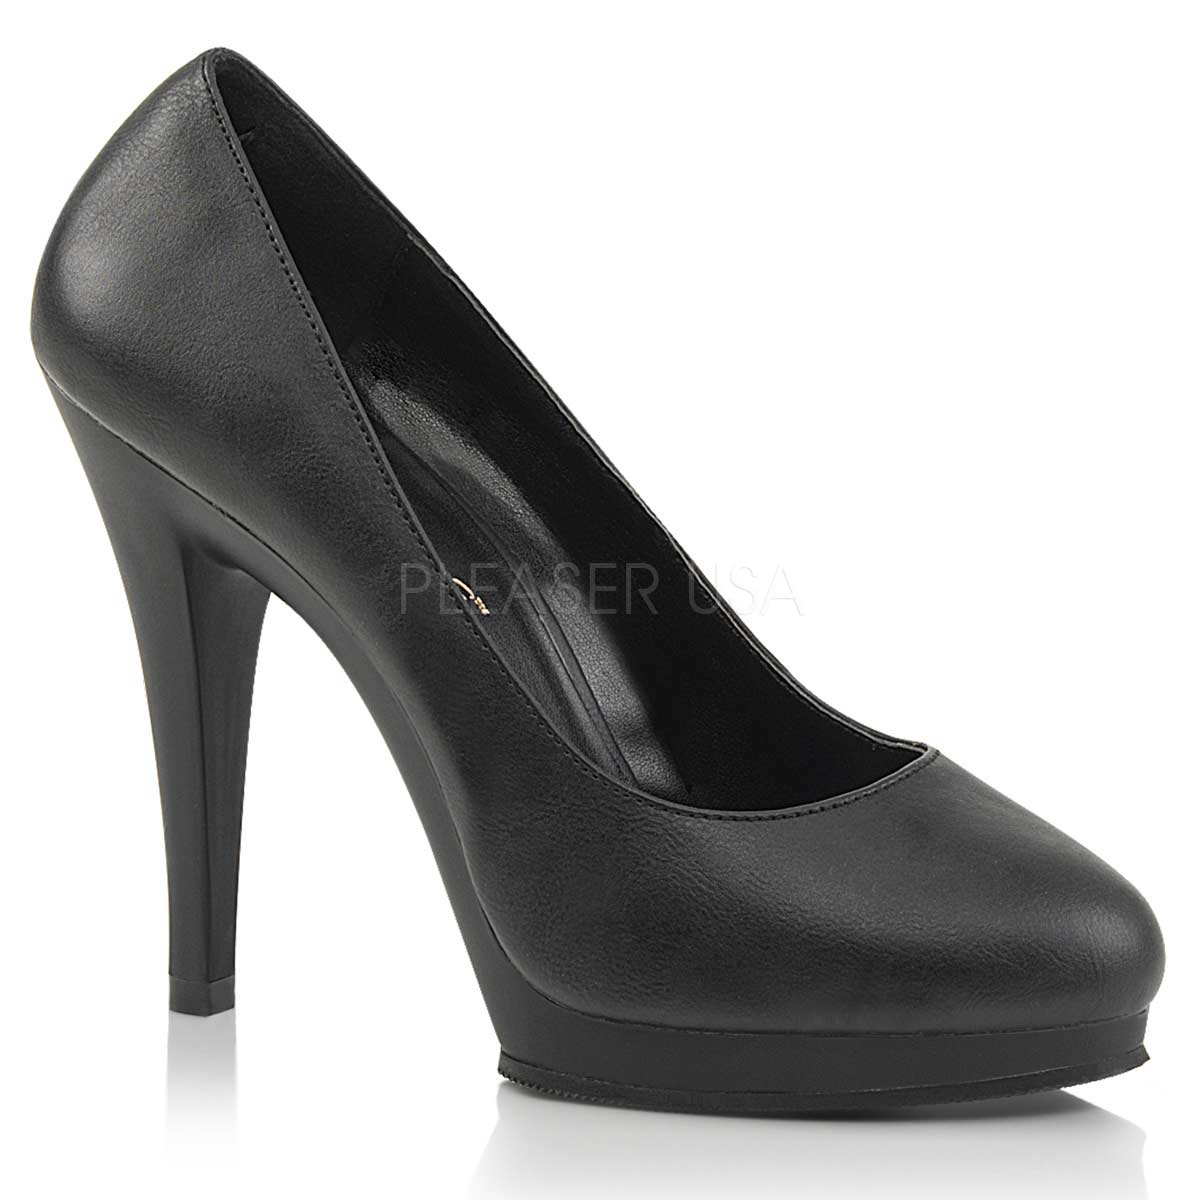 Clearance Pleaser Pink Label Flair 480 Black Matt Size 4UK/7USA - From Clearance Sold By Alternative Footwear